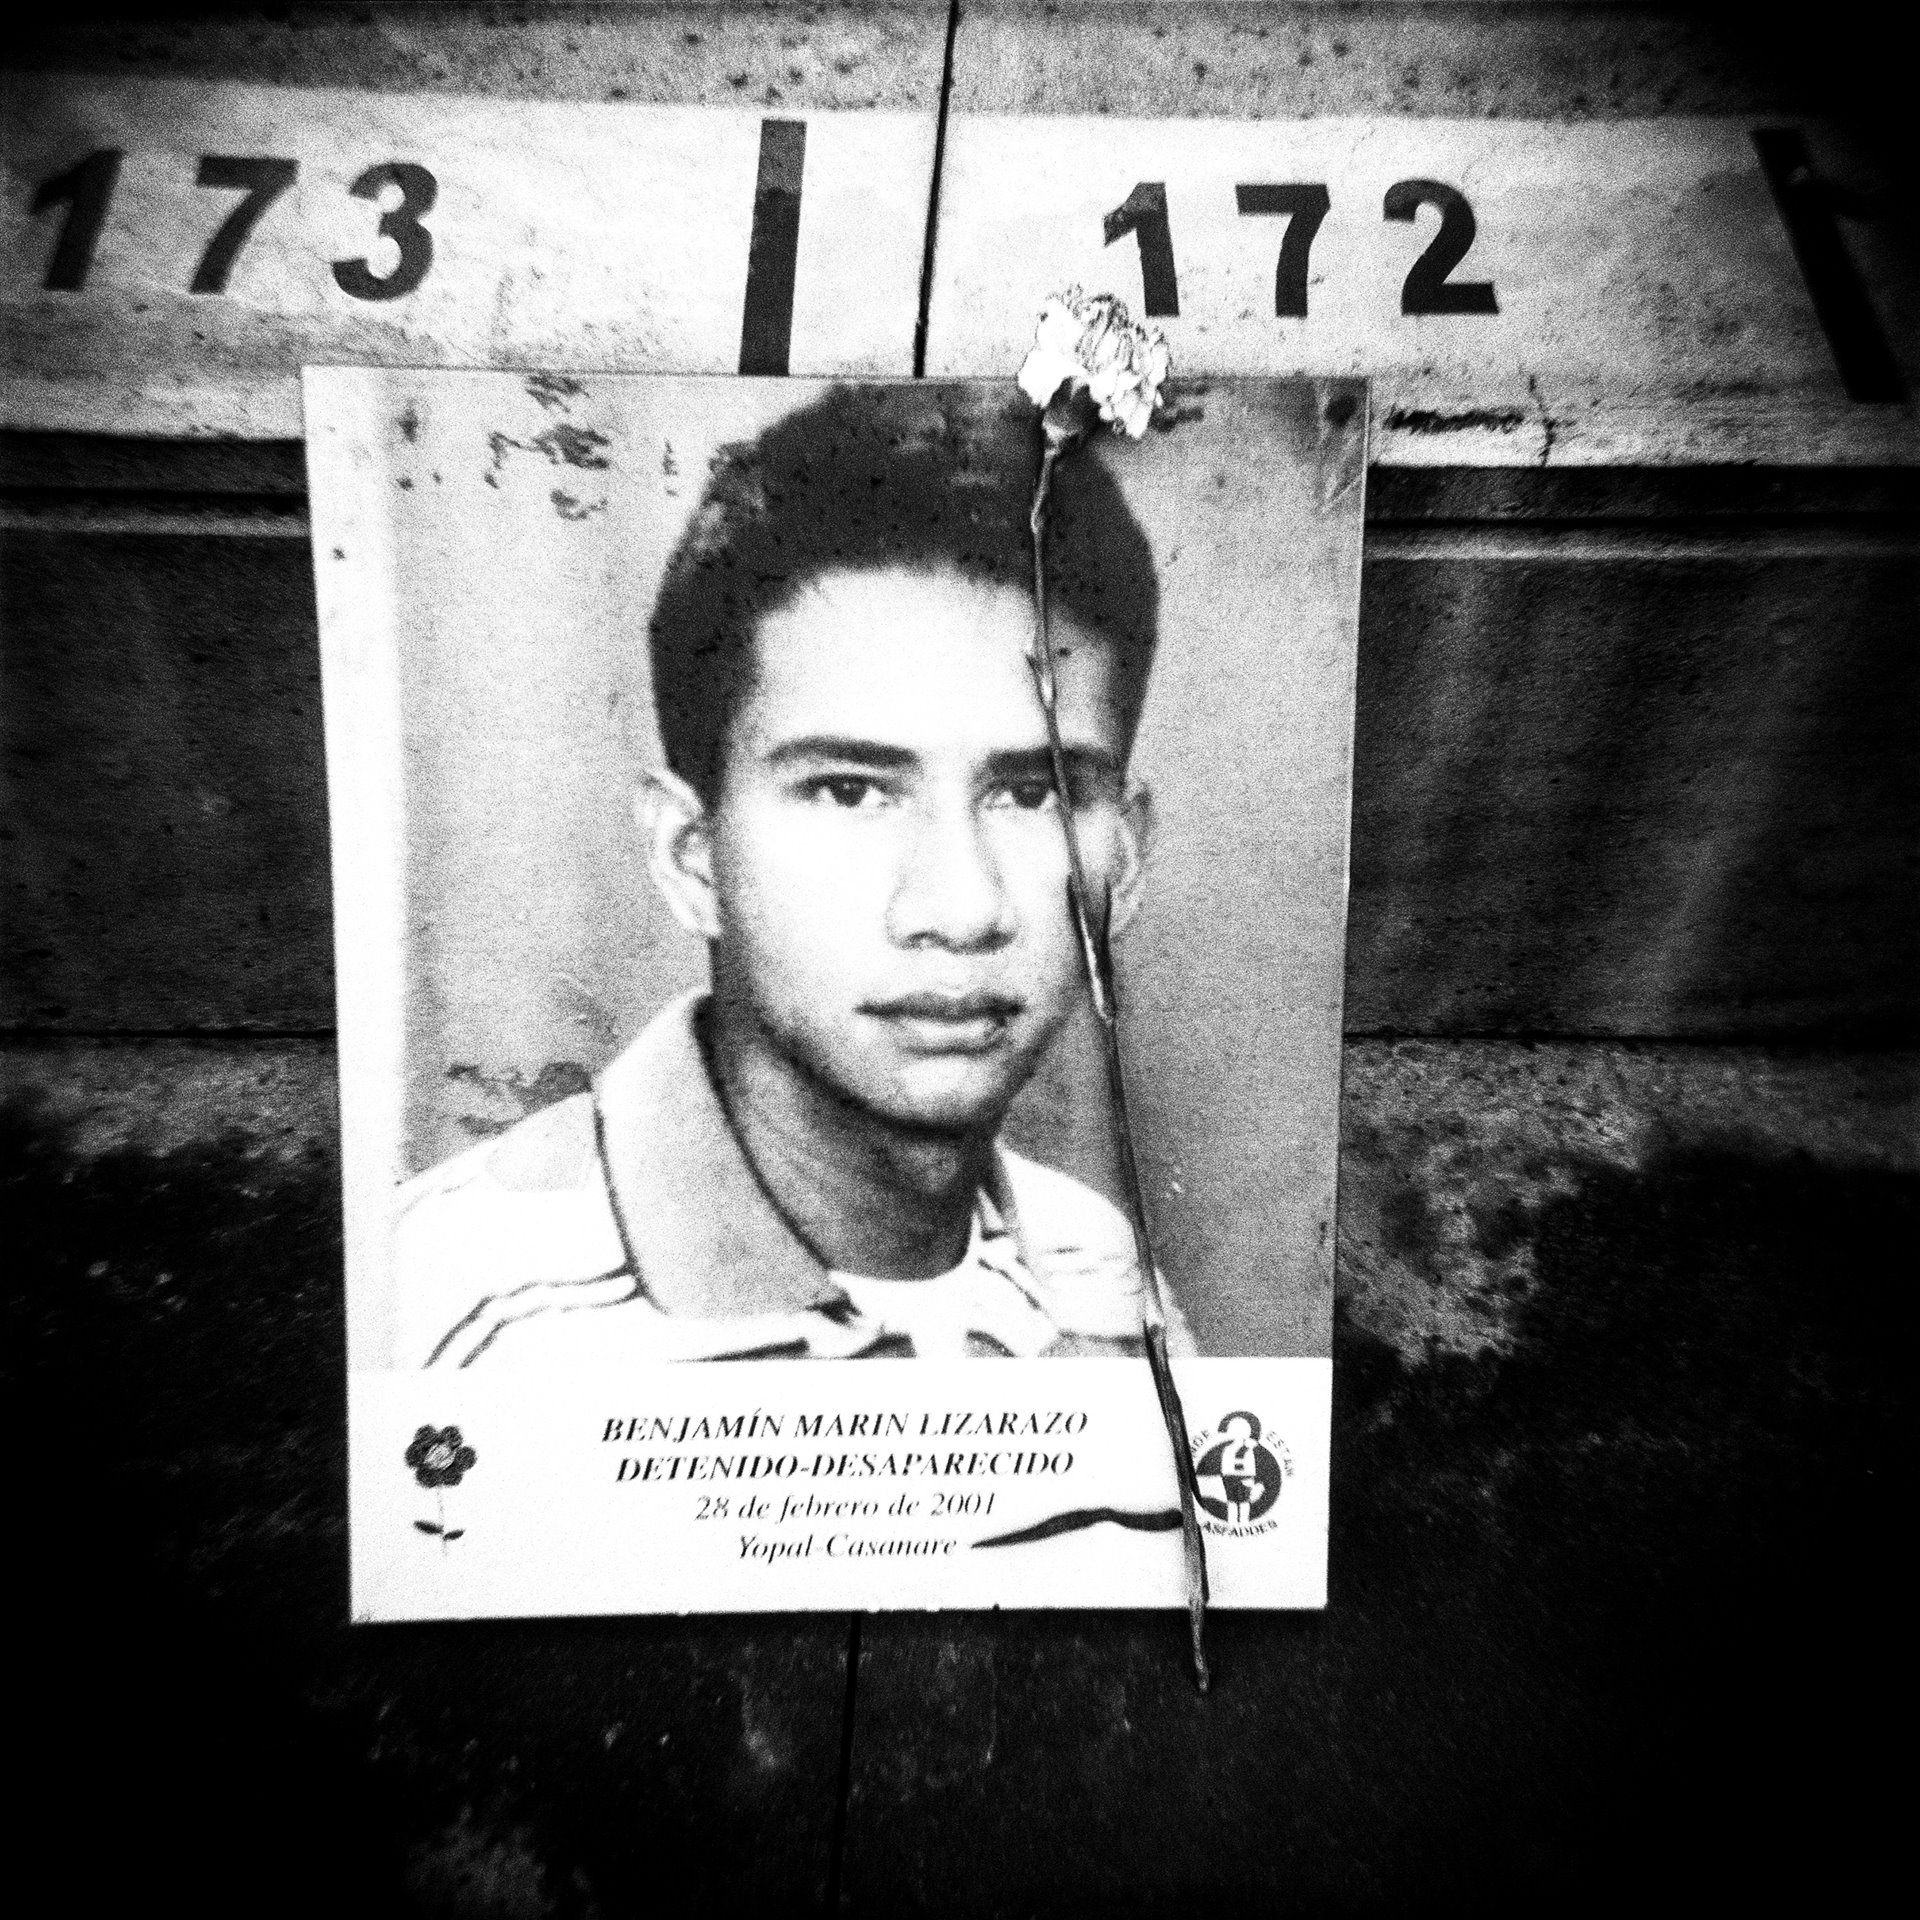 A photograph of Benjamín Marín Lizarazo is displayed at the Santamaria Bullring in Bogotá, a &nbsp;day before the International Day of the Victims of Forced Disappearance. Lizarazo, a journalist and social leader in the rural region of Casanare, disappeared in 2001 and his whereabouts are still unknown. The day after his disappearance, members of the Colombian military raided his house.